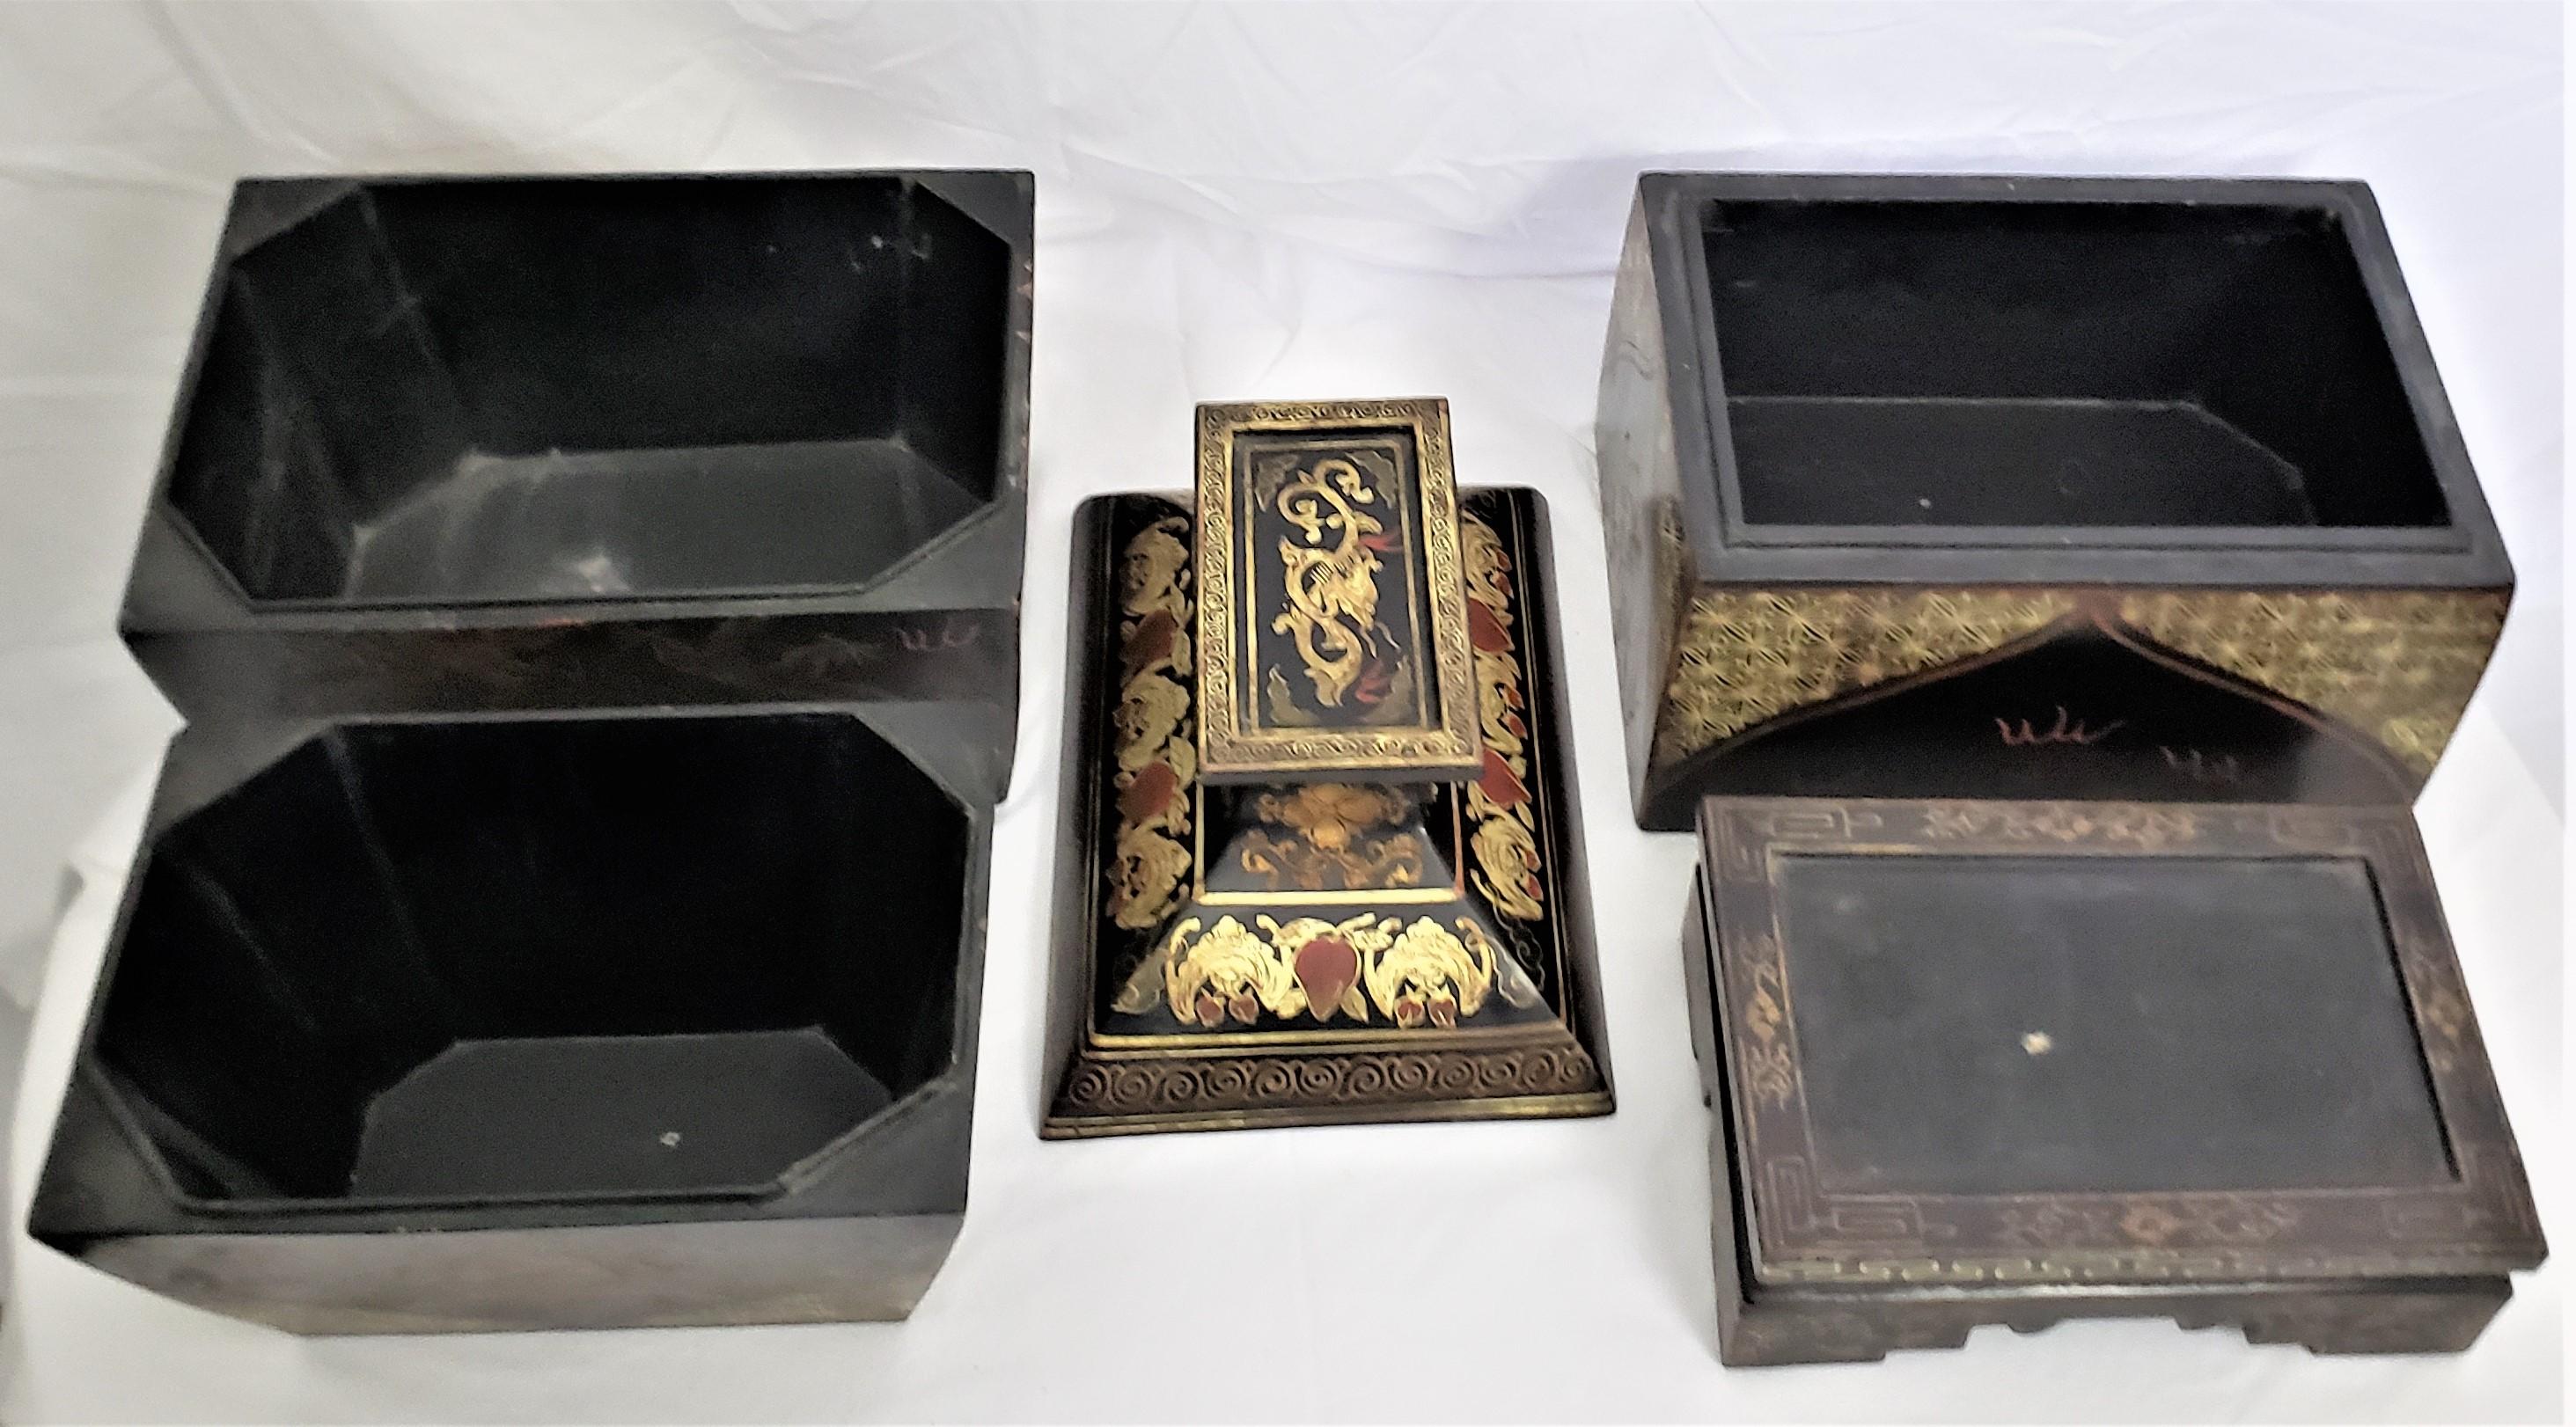 Antique Early Chinese Republic Era Stacking Lacquered Box Set with Dragon Motif For Sale 11